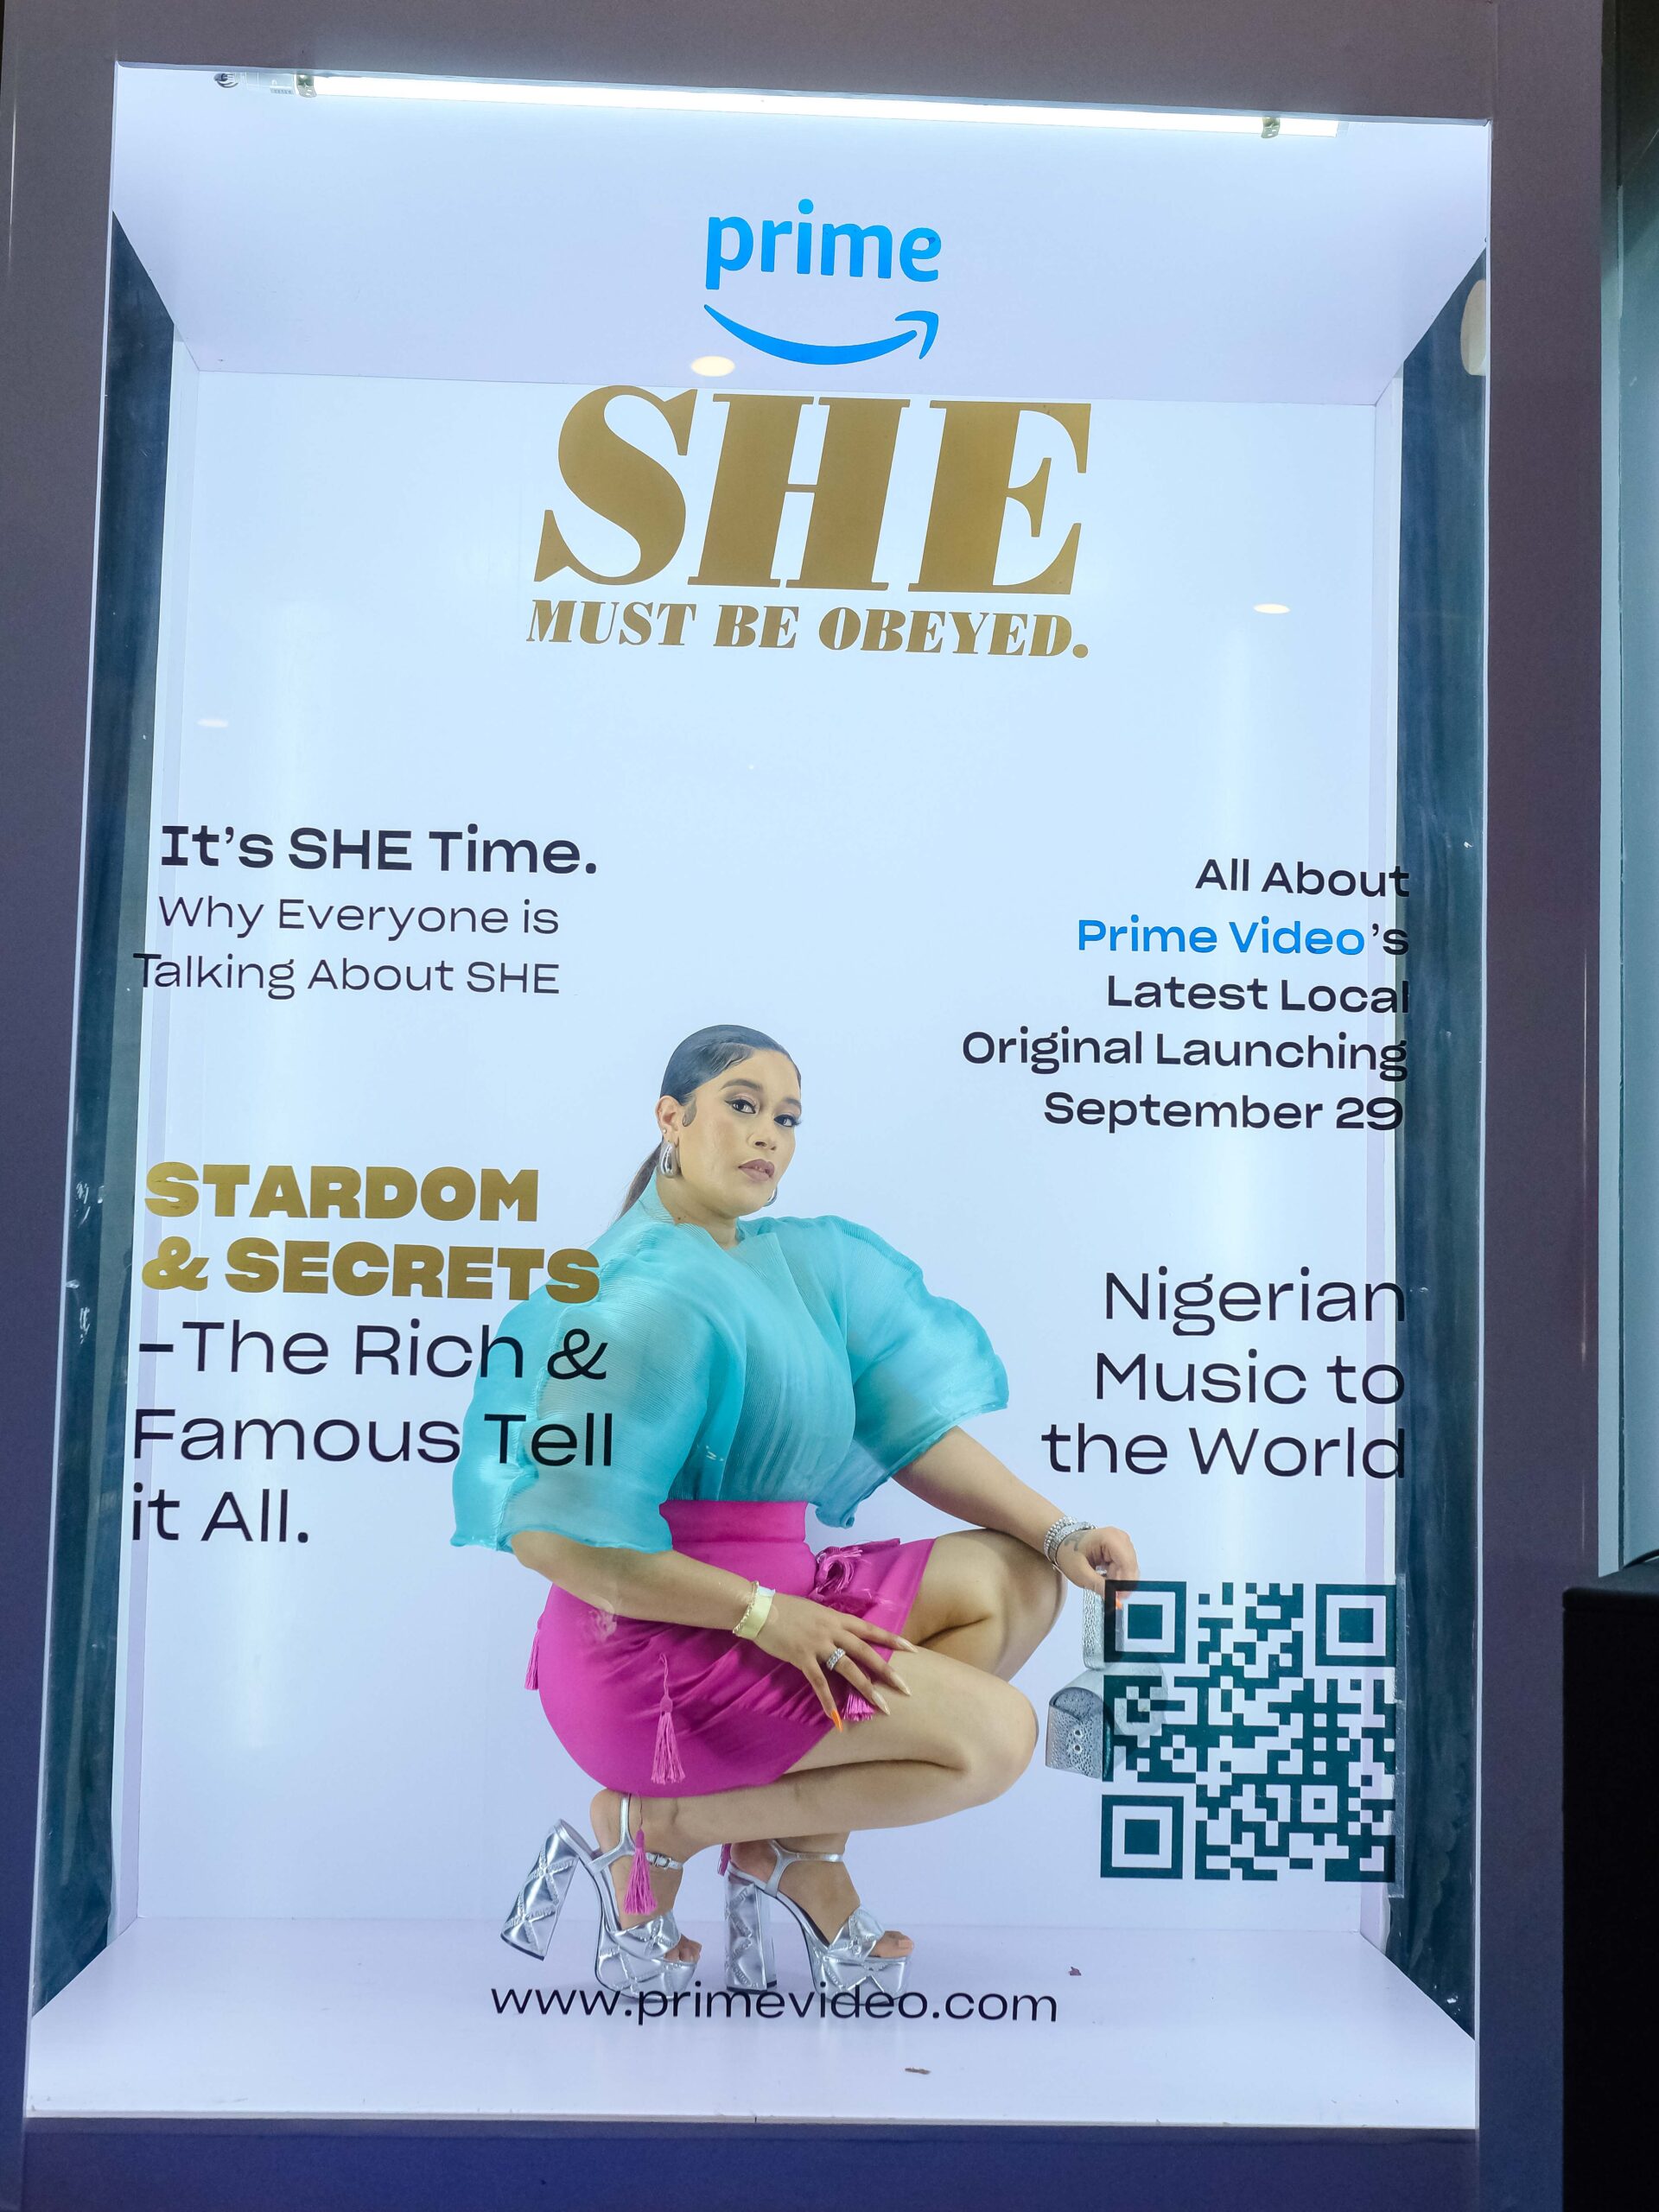 DSCF0641 scaled - Prime Video Launches “She Must Be Obeyed” Series, Its 3rd Nigerian Original Title With Grandeur and Style!